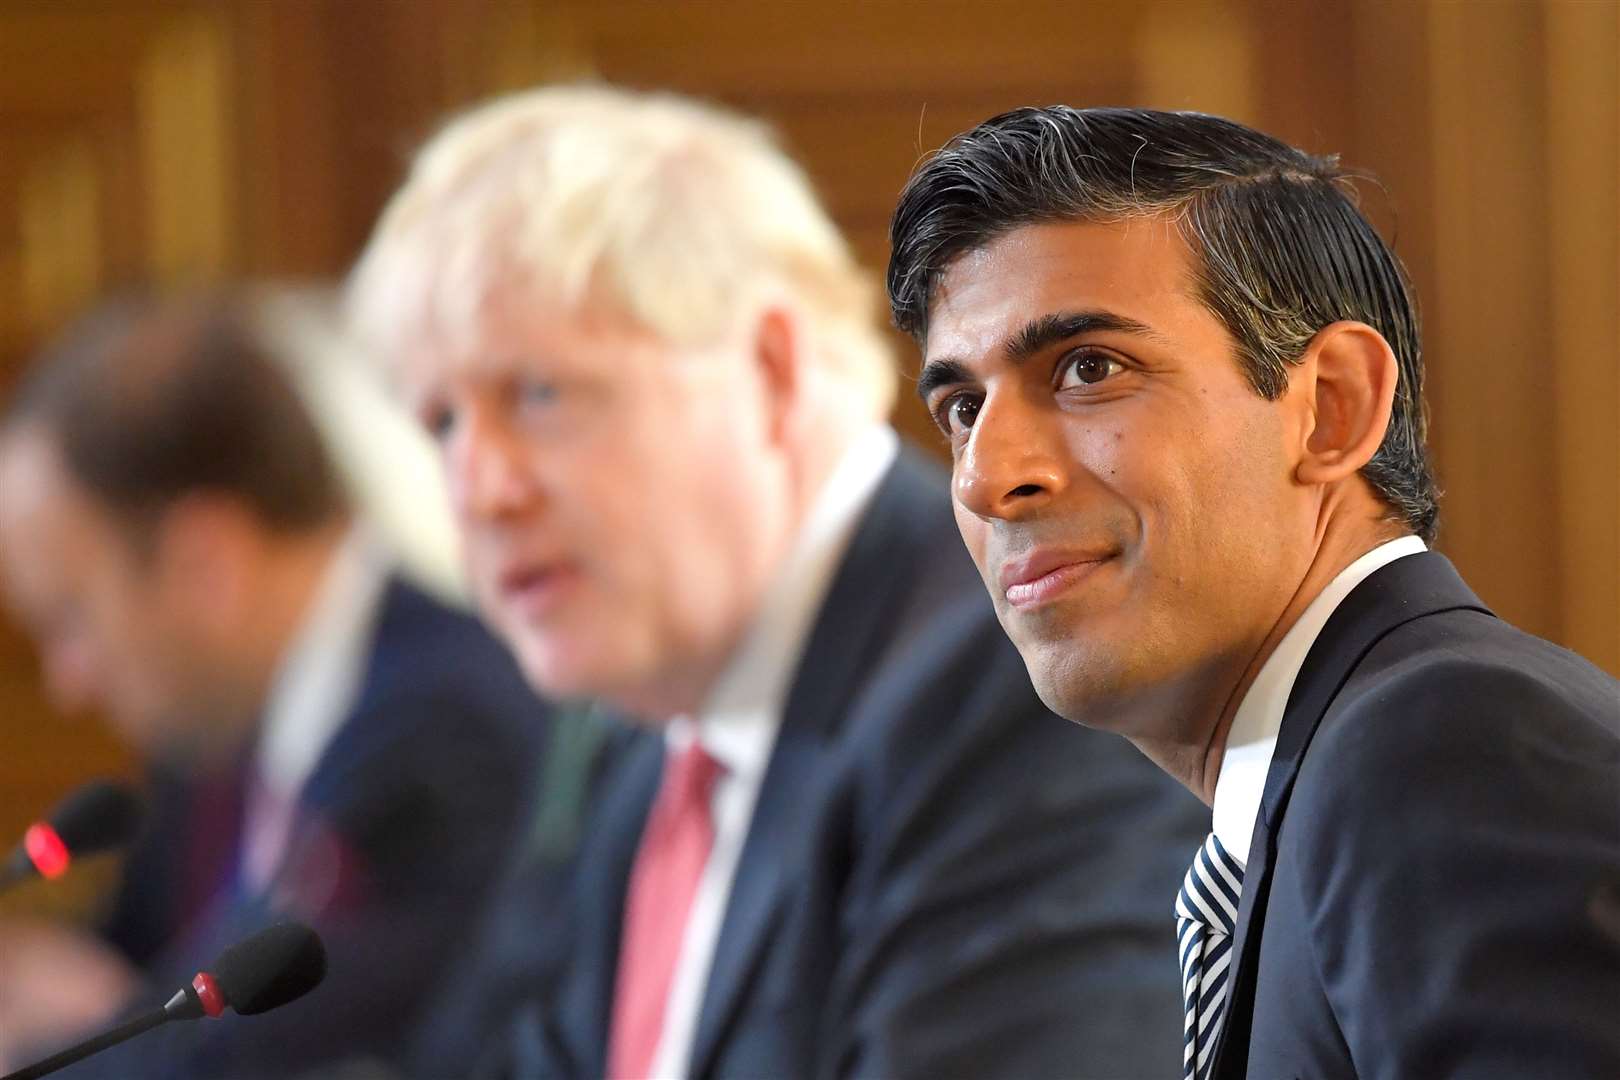 Chancellor of the Exchequer Rishi Sunak will need to set out a solid agenda at November’s budget, experts said (Toby Melville/PA)